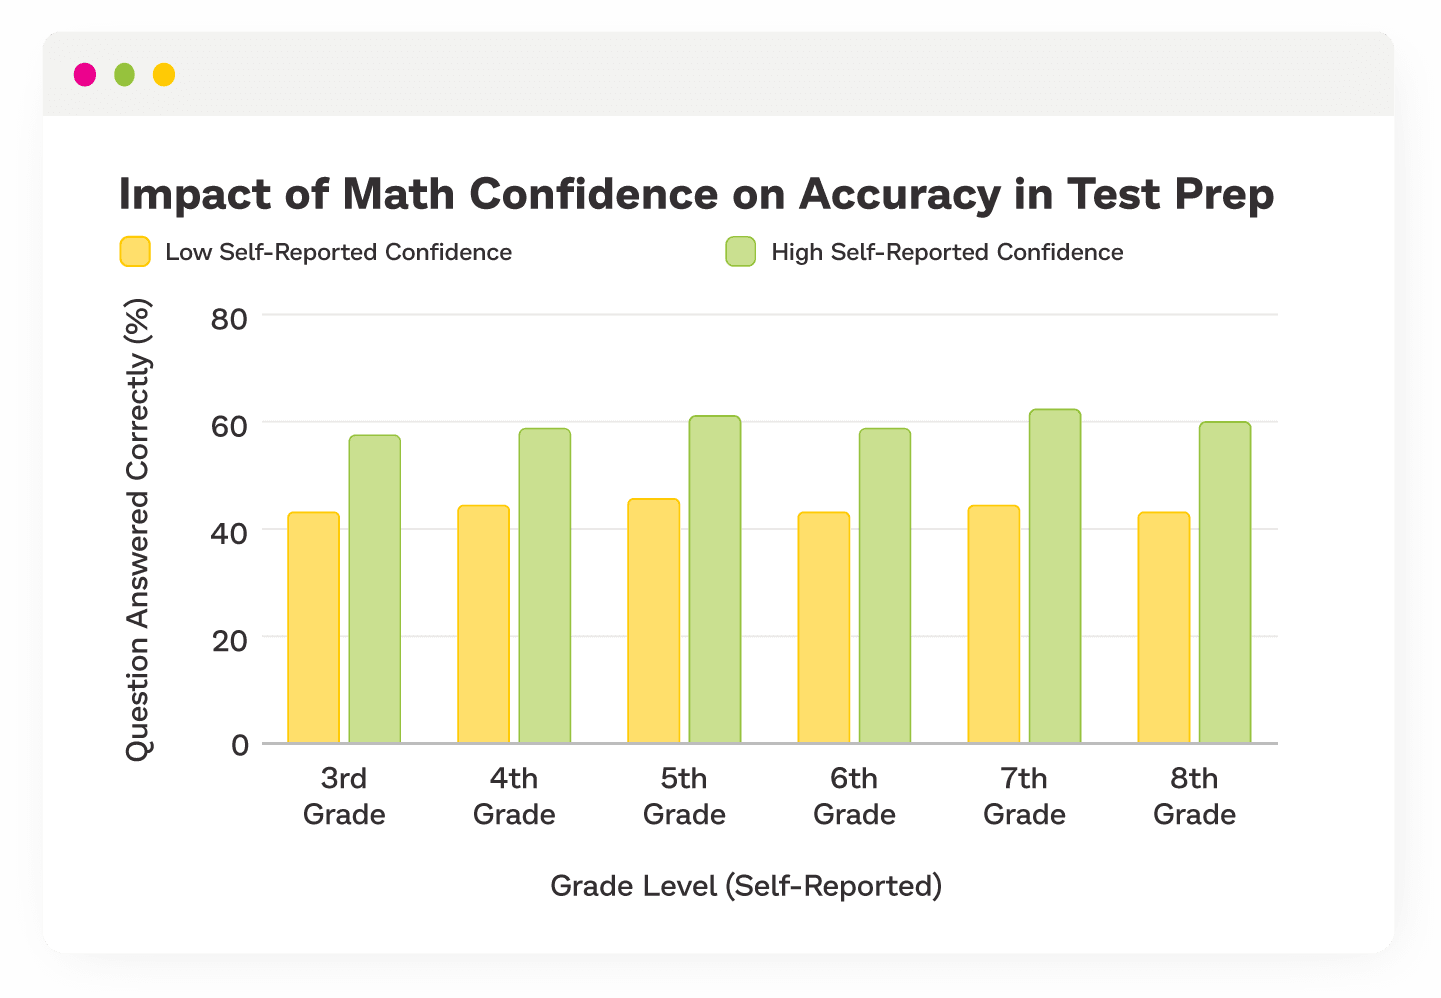 Bar chart showing the impact of math confidence on the accuracy of Prodigy's Test Prep tool, broken down by grade level. 